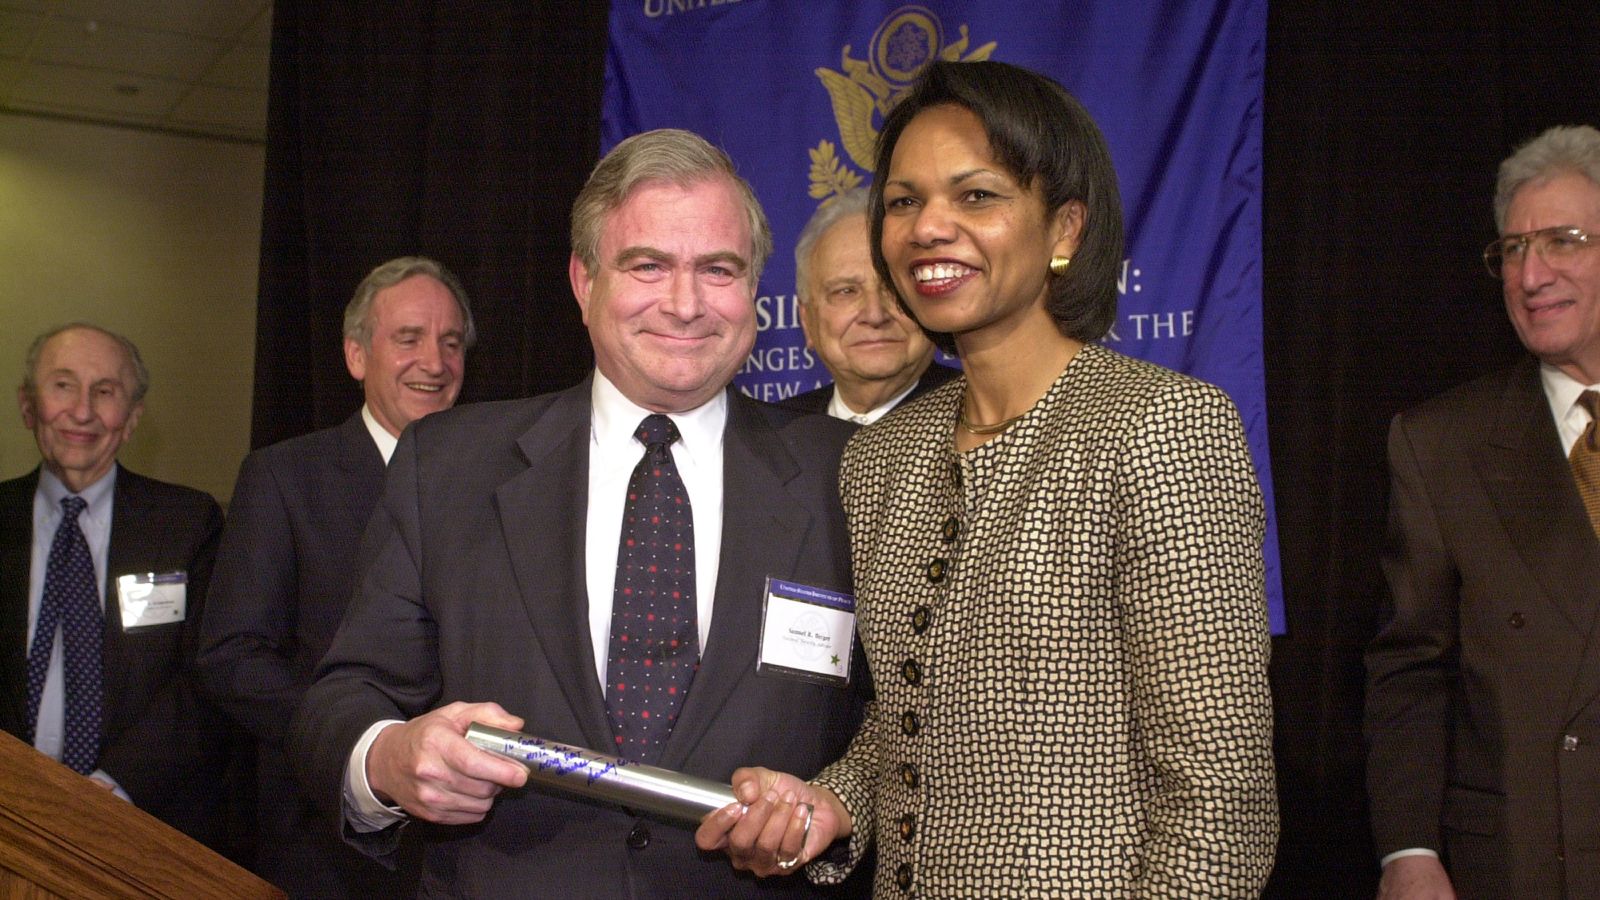 Samuel Richard "Sandy" Berger, United States National Security Advisor for President Bill Clinton passing the baton to then-incumbent Condoleezza "Condi" Rice who served United States Secretary of State under of President George W. Bush